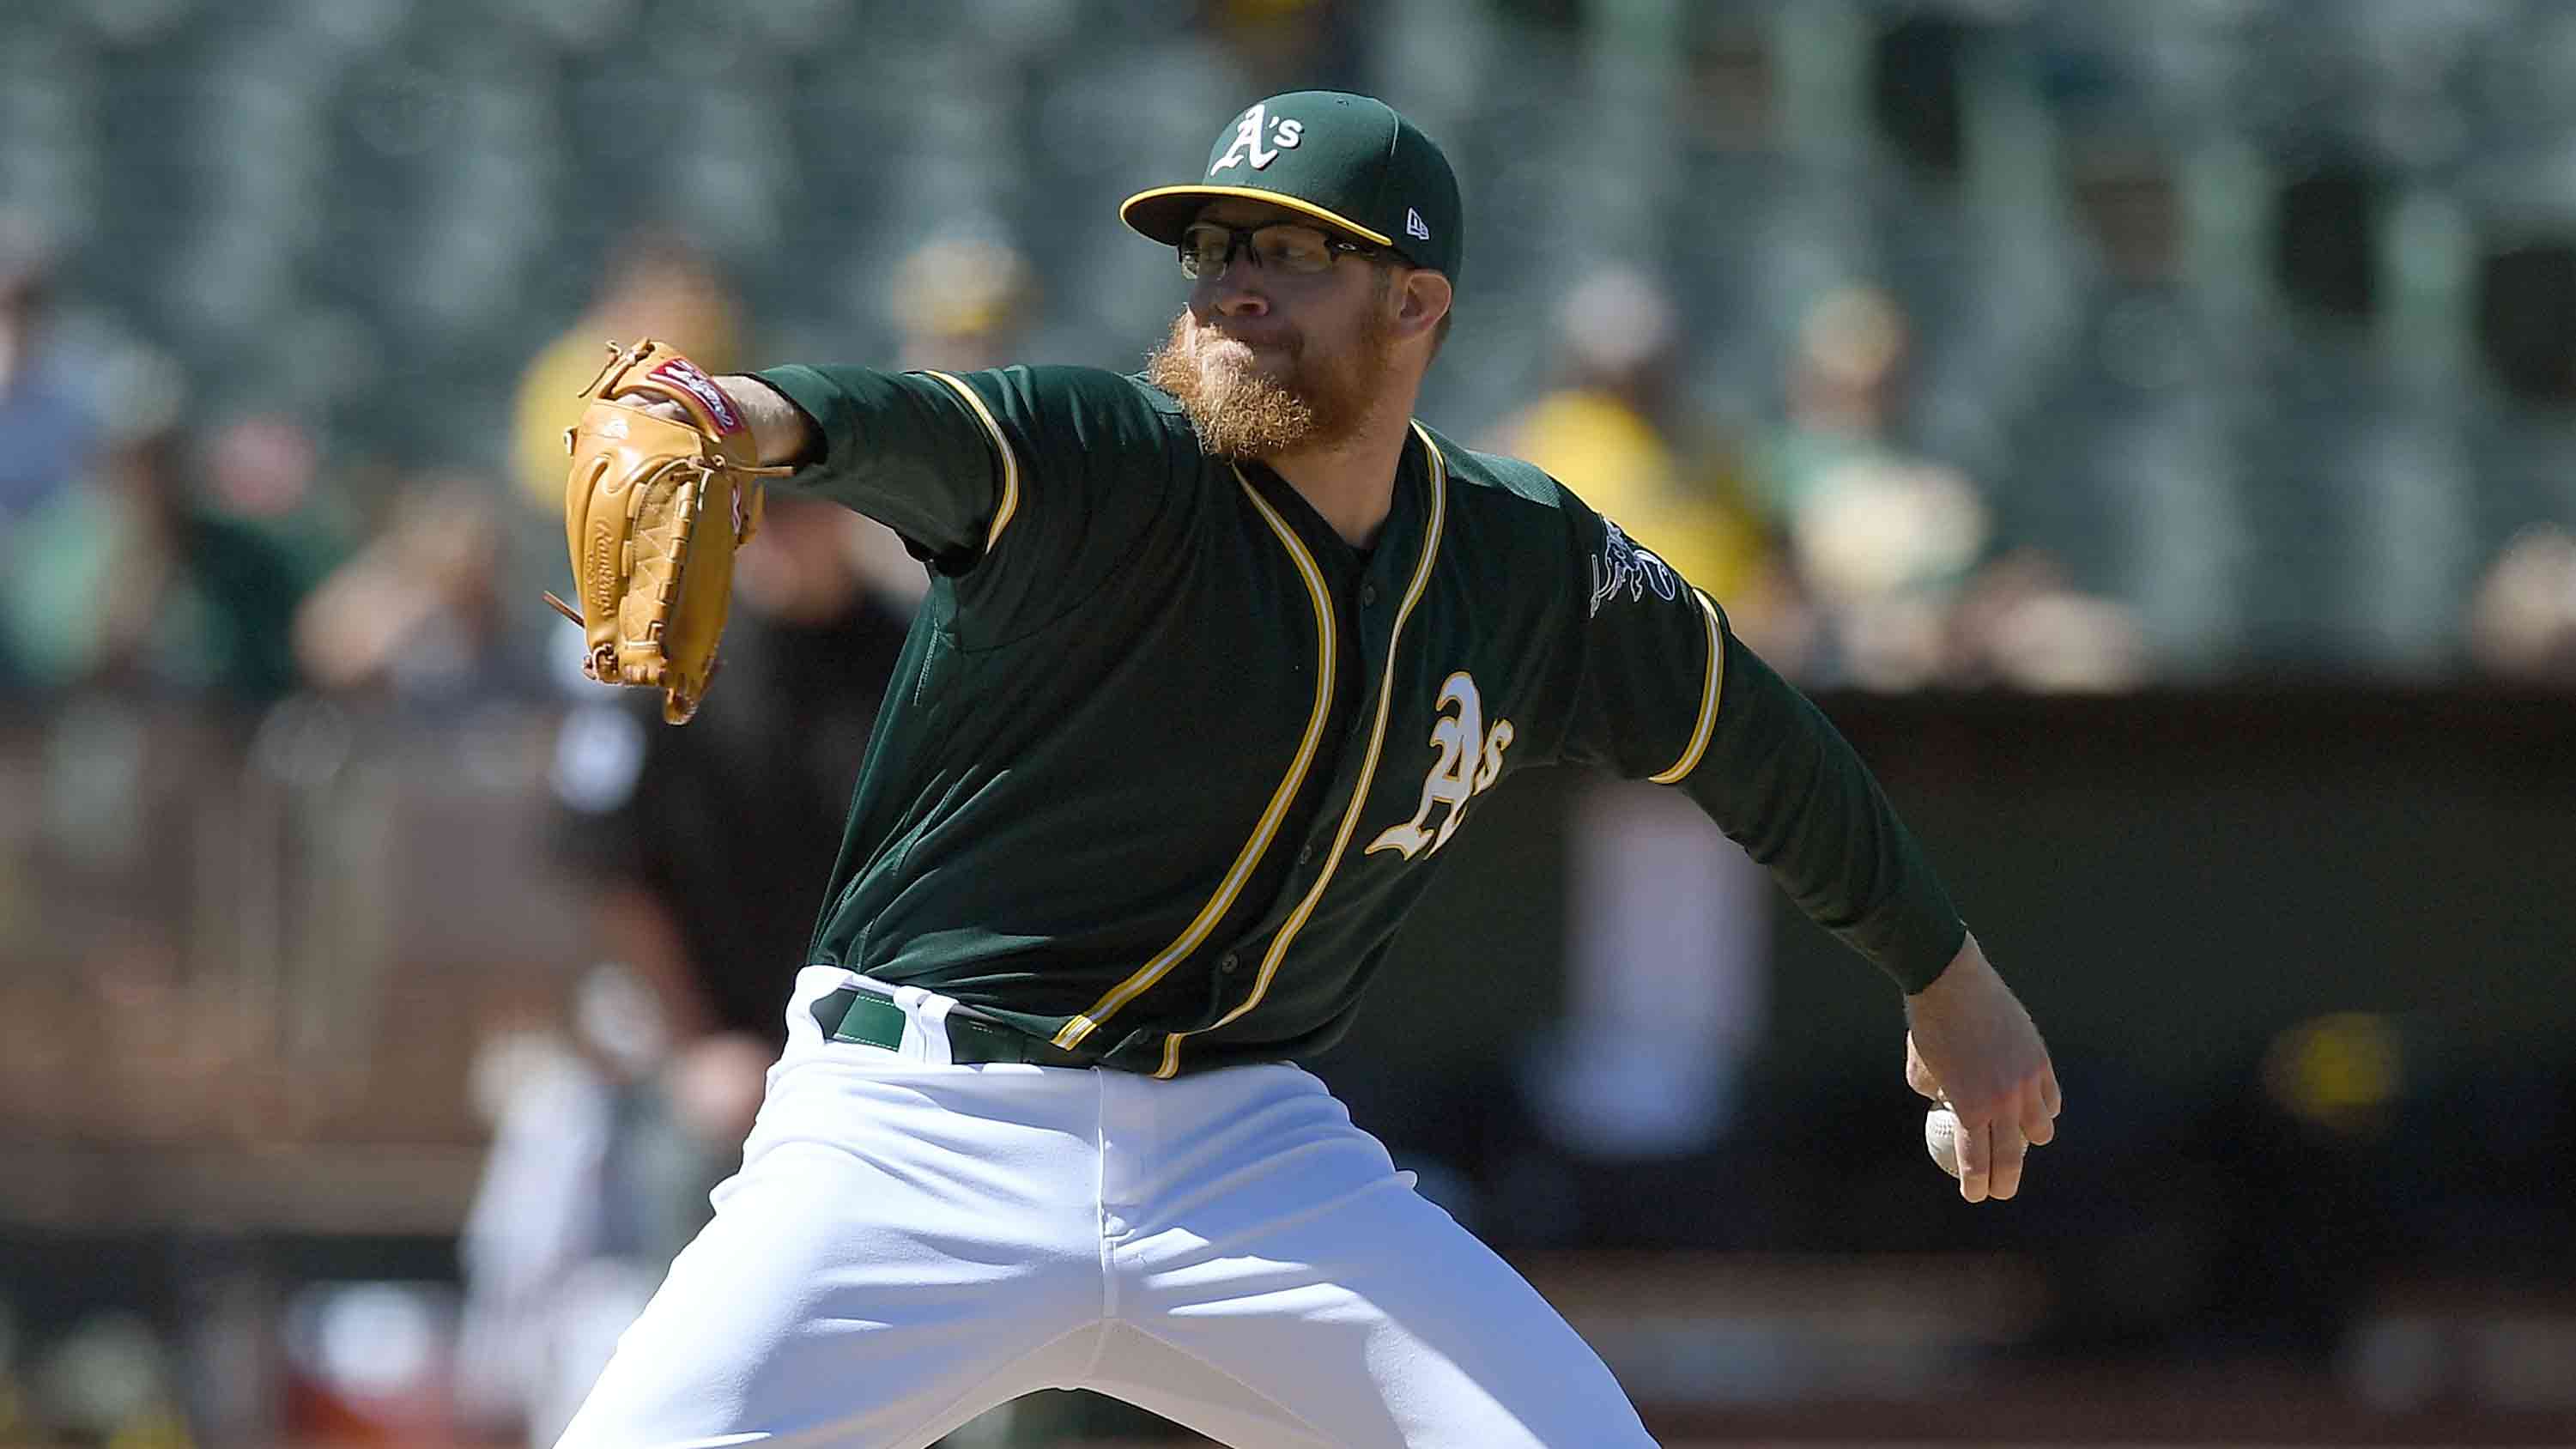 Sean Doolittle retires after 11 MLB seasons with a 'full heart